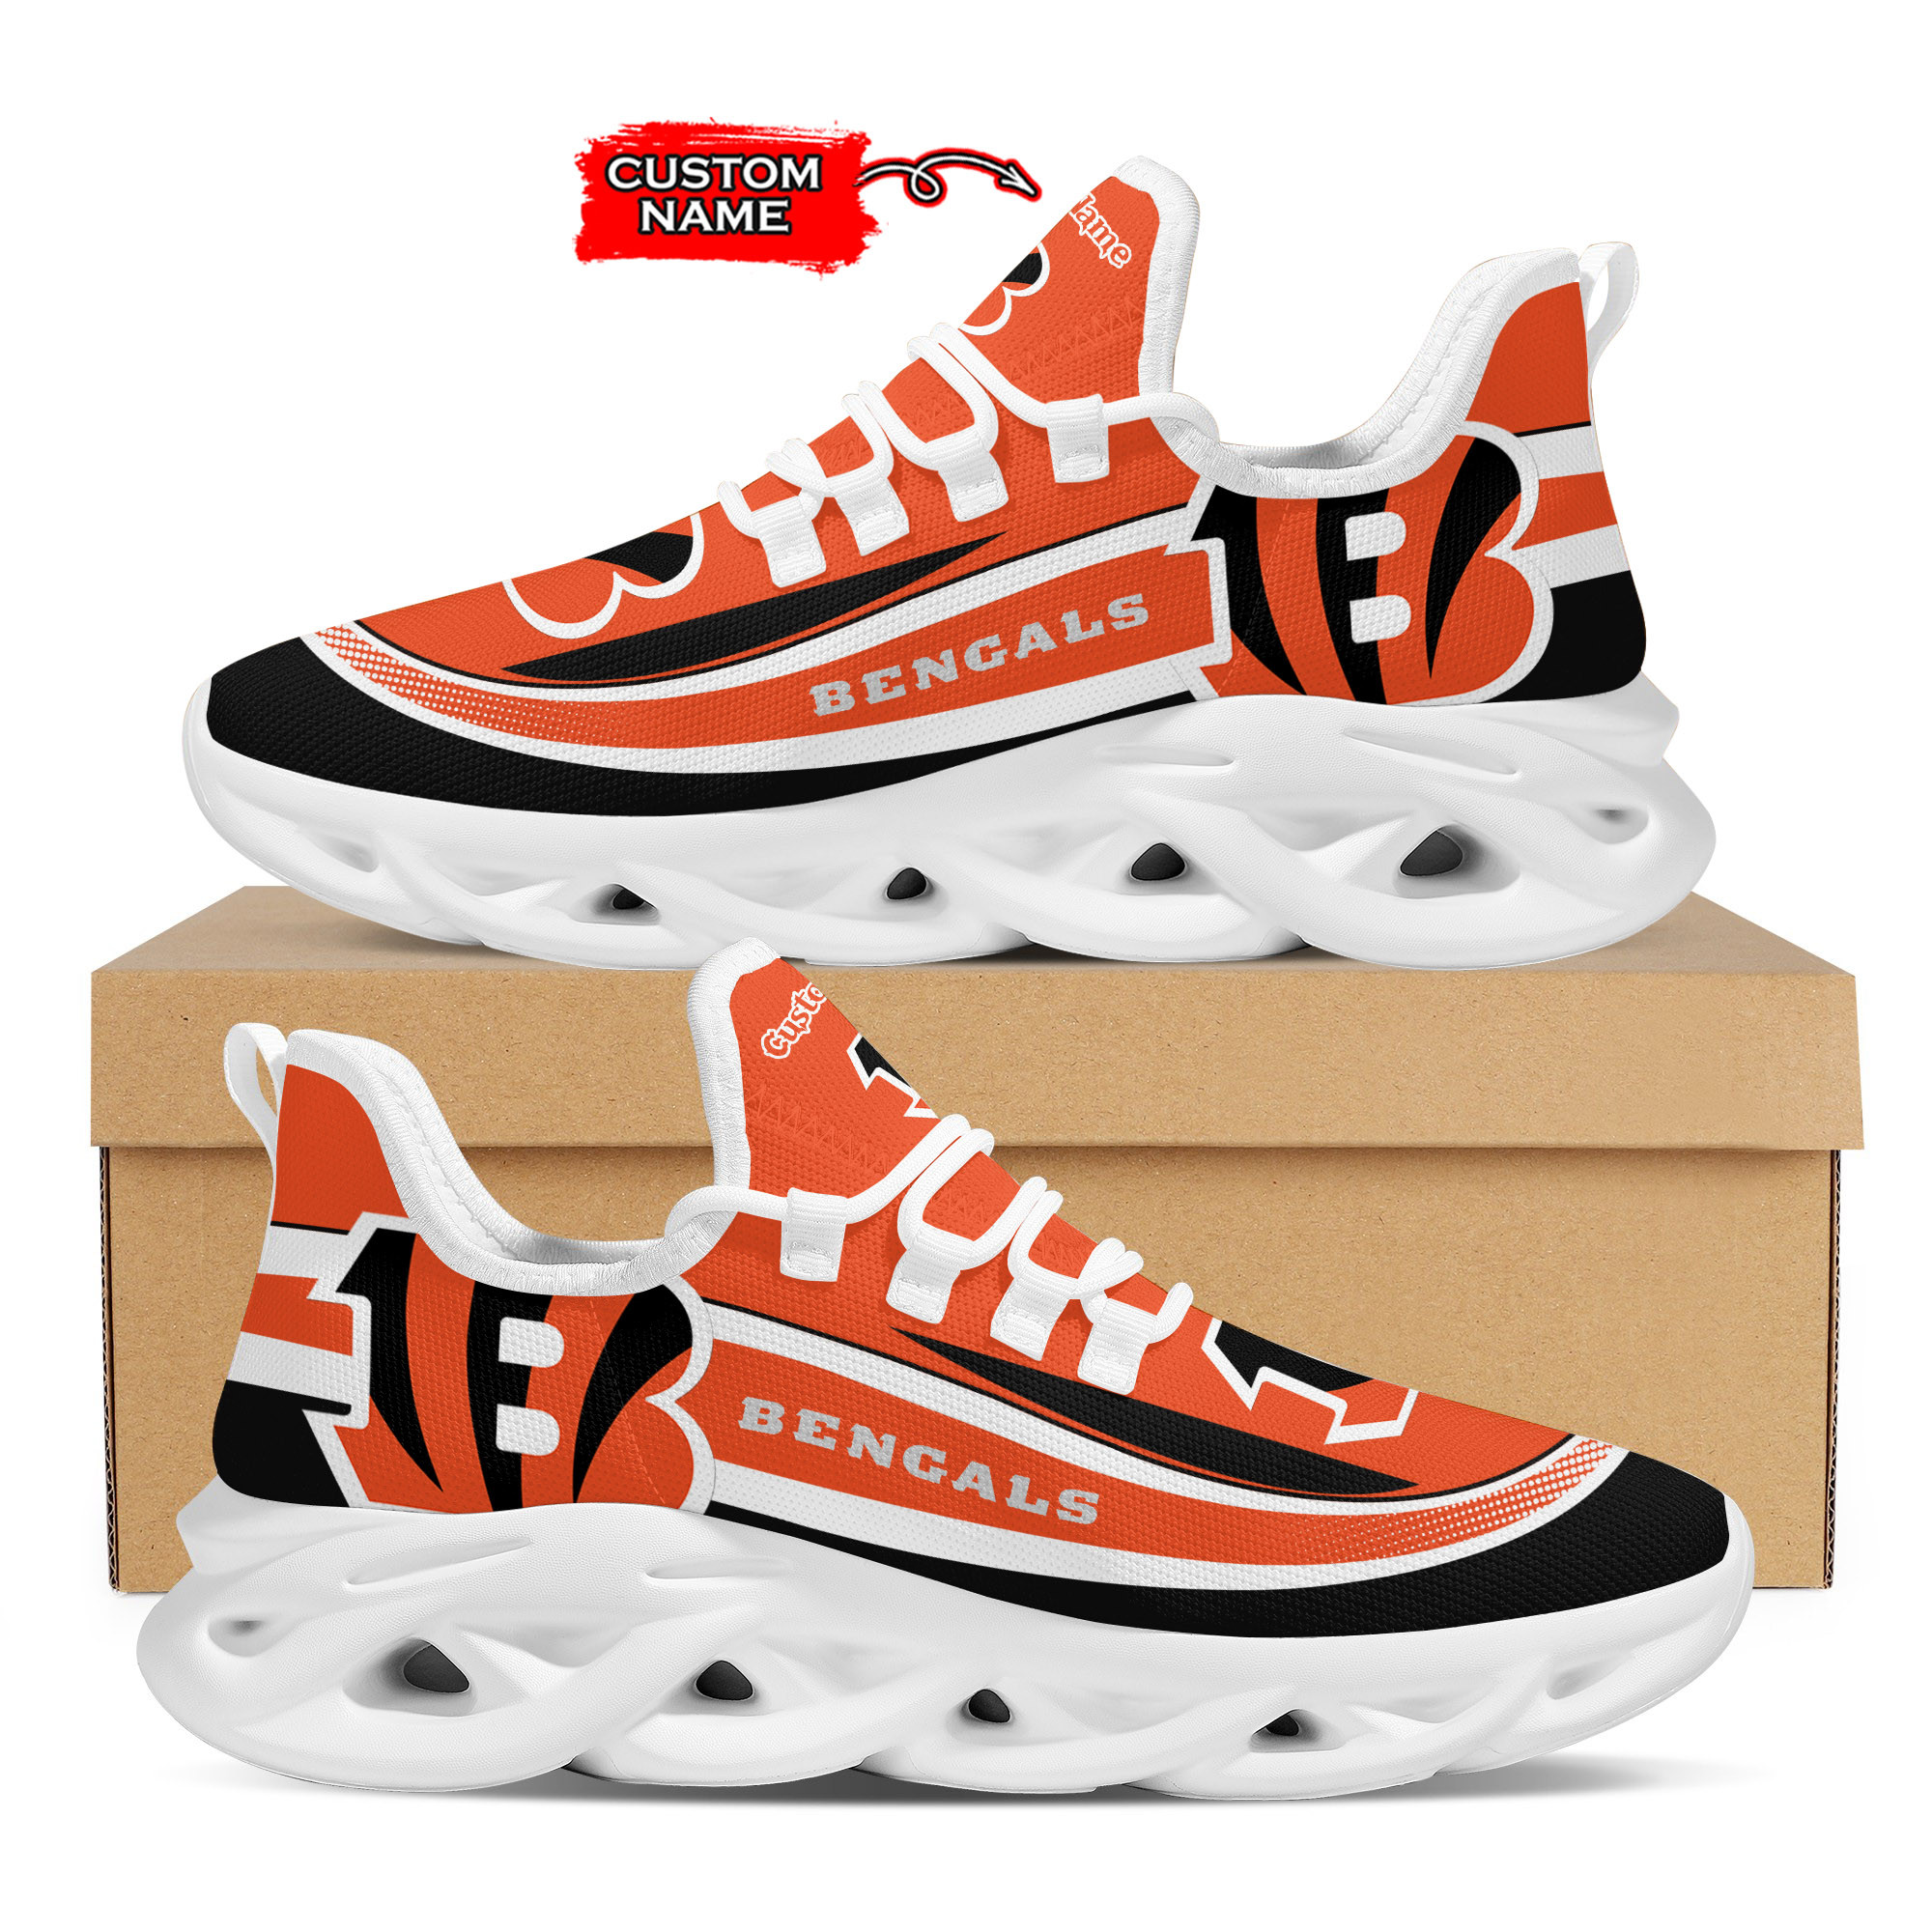 Cincinnati Bengals Nfl Custom Name Clunky Max Soul Shoes Sneakers For Mens Womens Personalized Gifts – Hothot